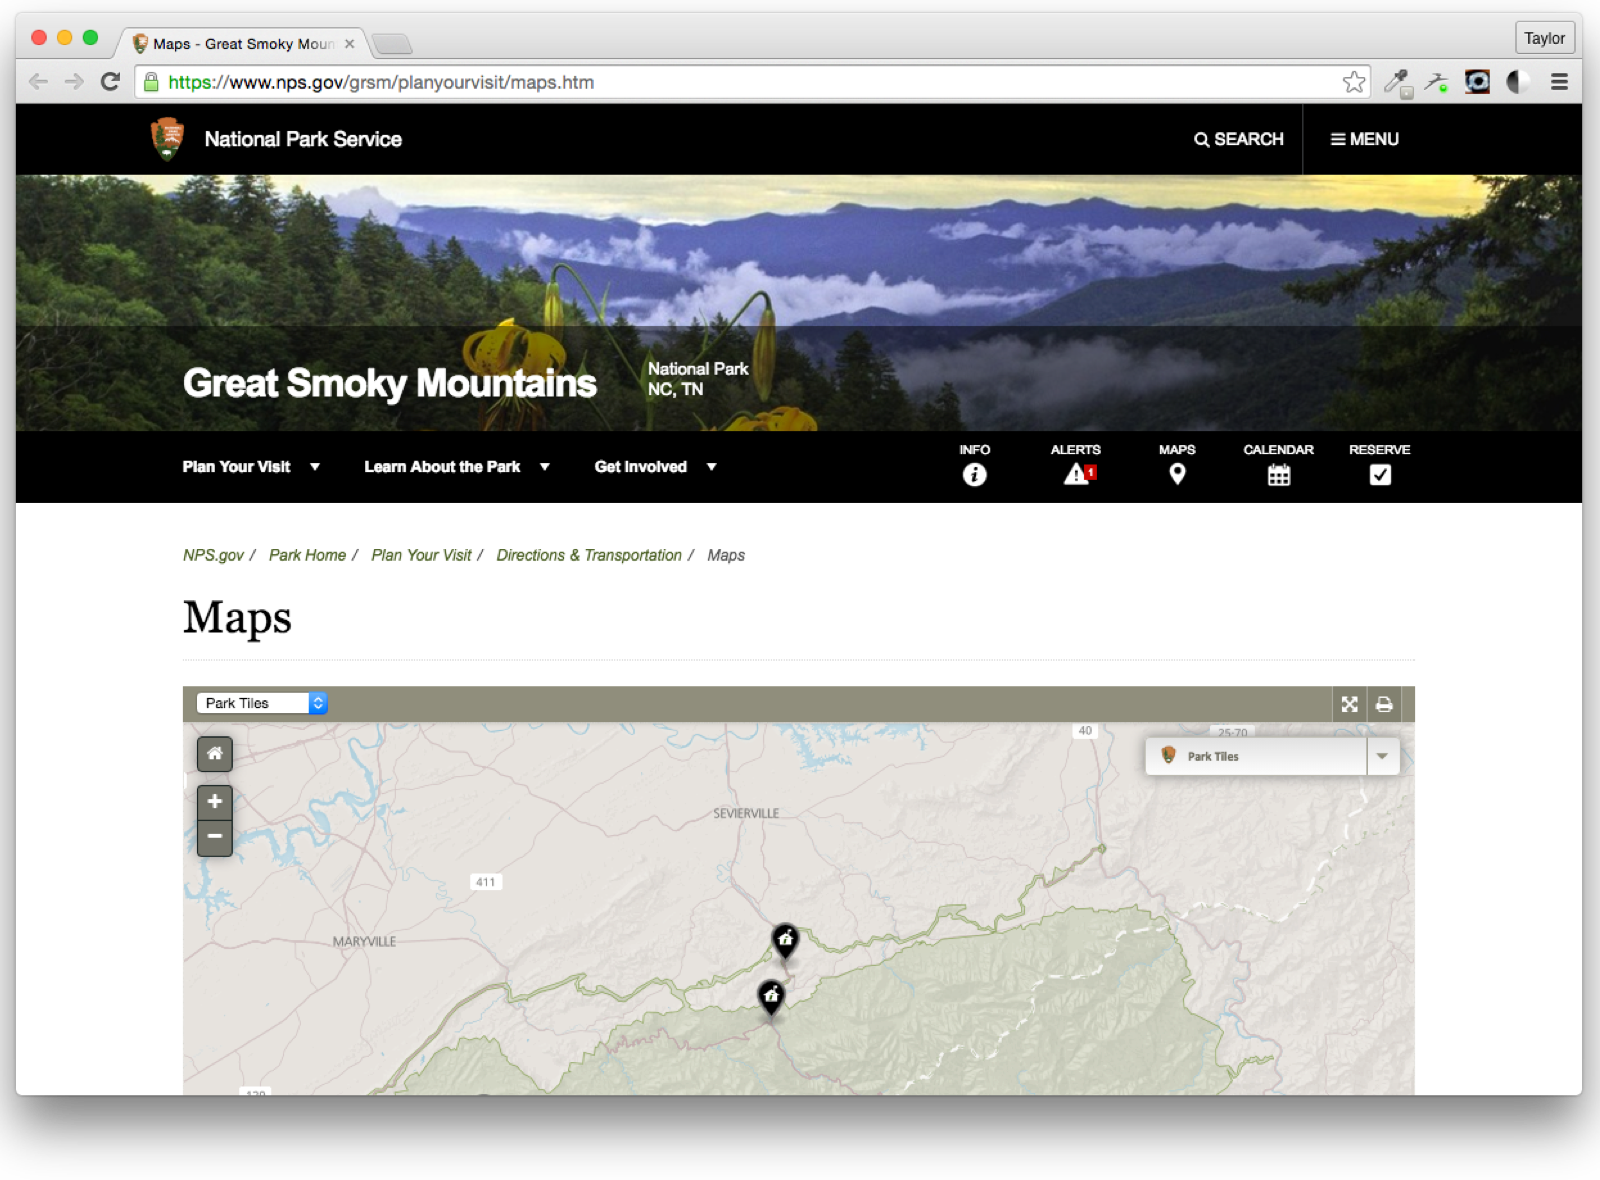 Great Smoky Mountains National Park Maps page